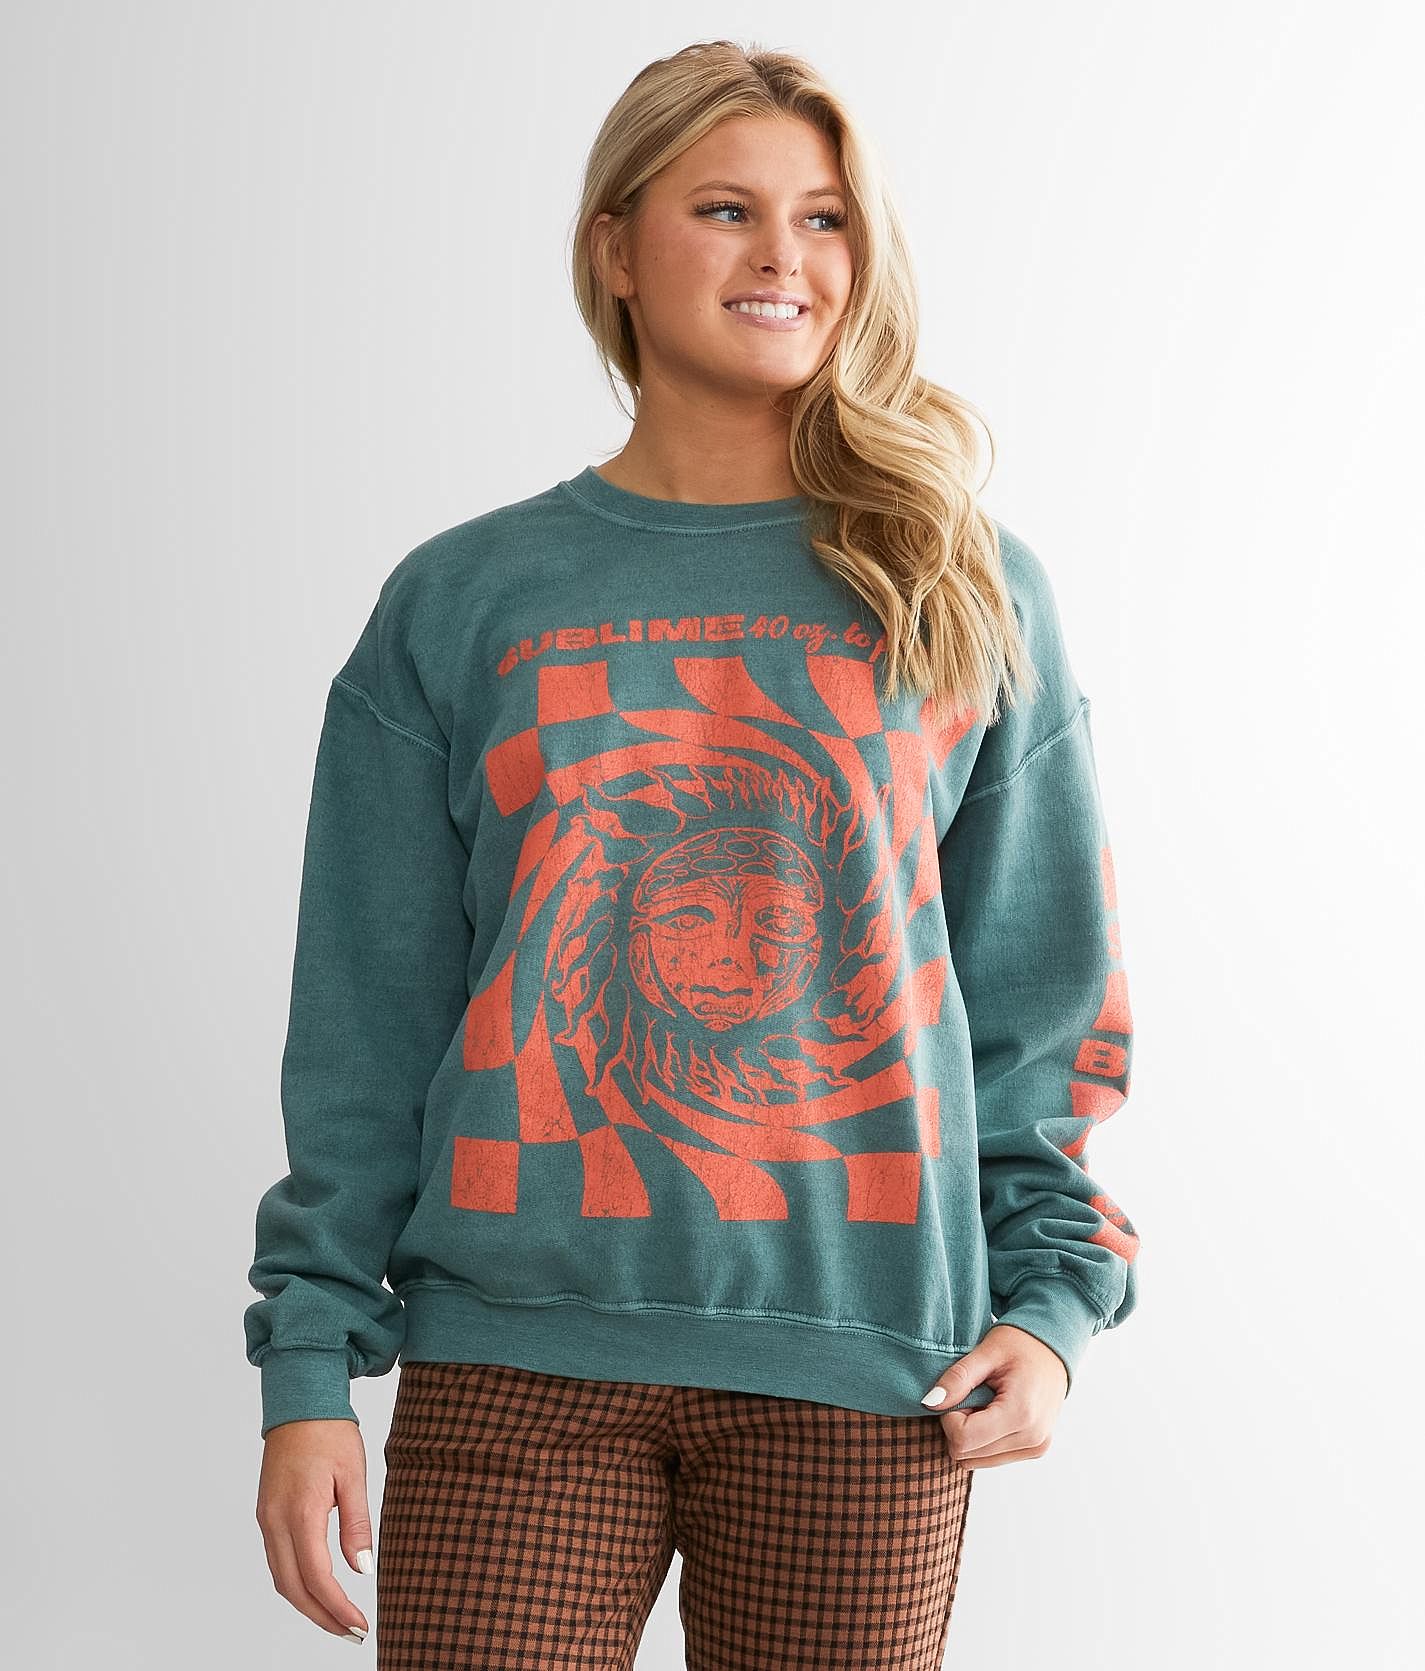 Sublime 4001 To Freedom Band Pullover - Women's Sweatshirts in Jade | Buckle